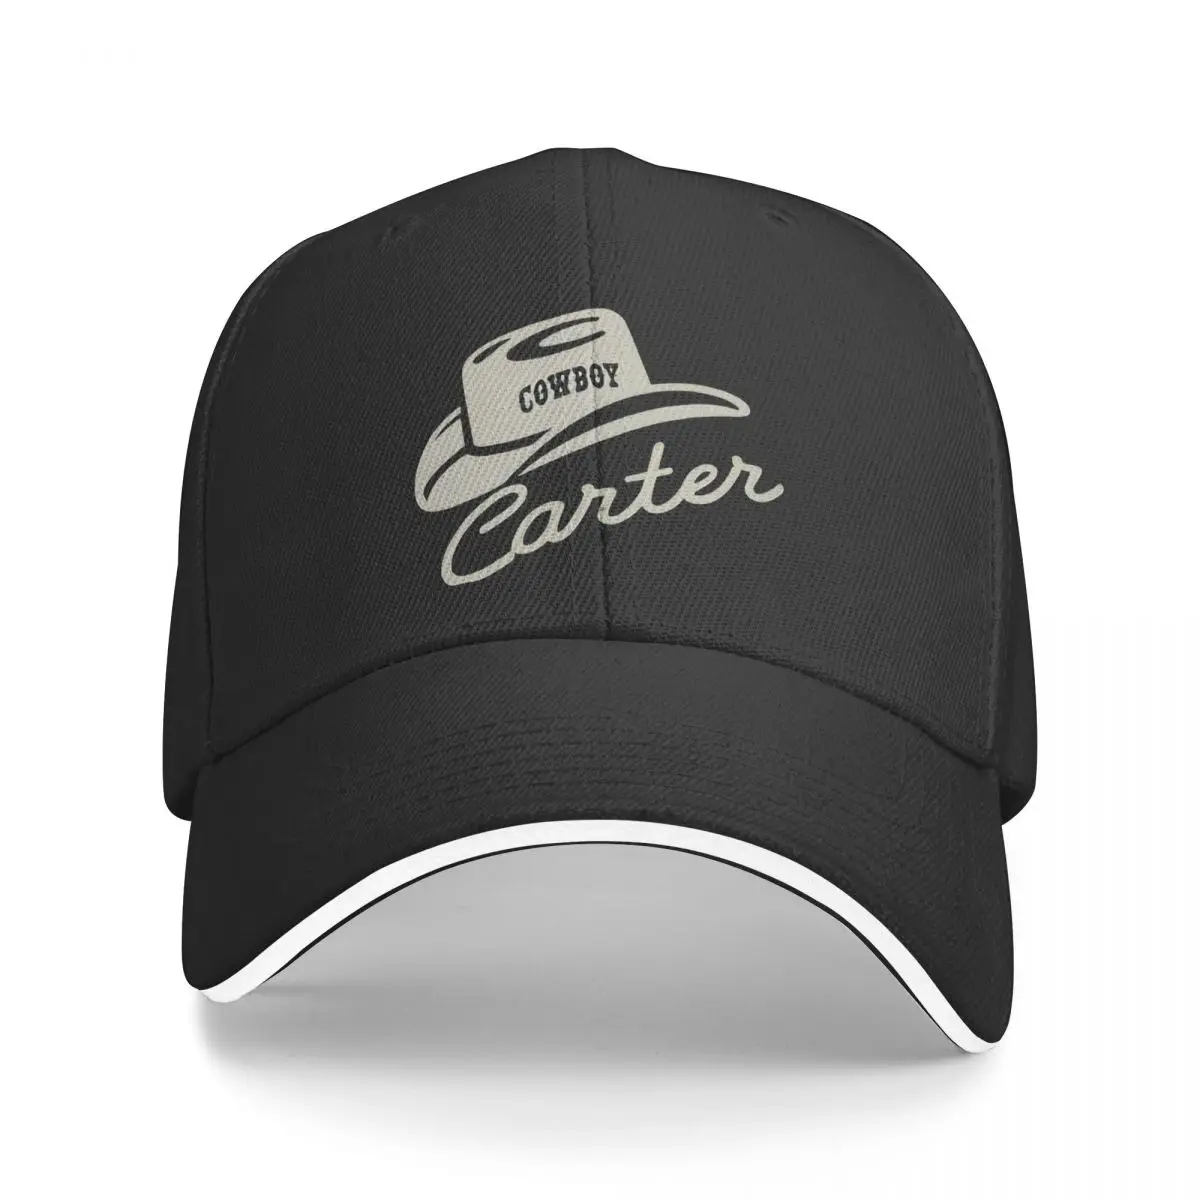 

Retro Cowboy Carter Beyonce Golf Hat Outfits Stylish Trucker Hat for Men Women for Outdoor Running Golf Headwear Adjustable